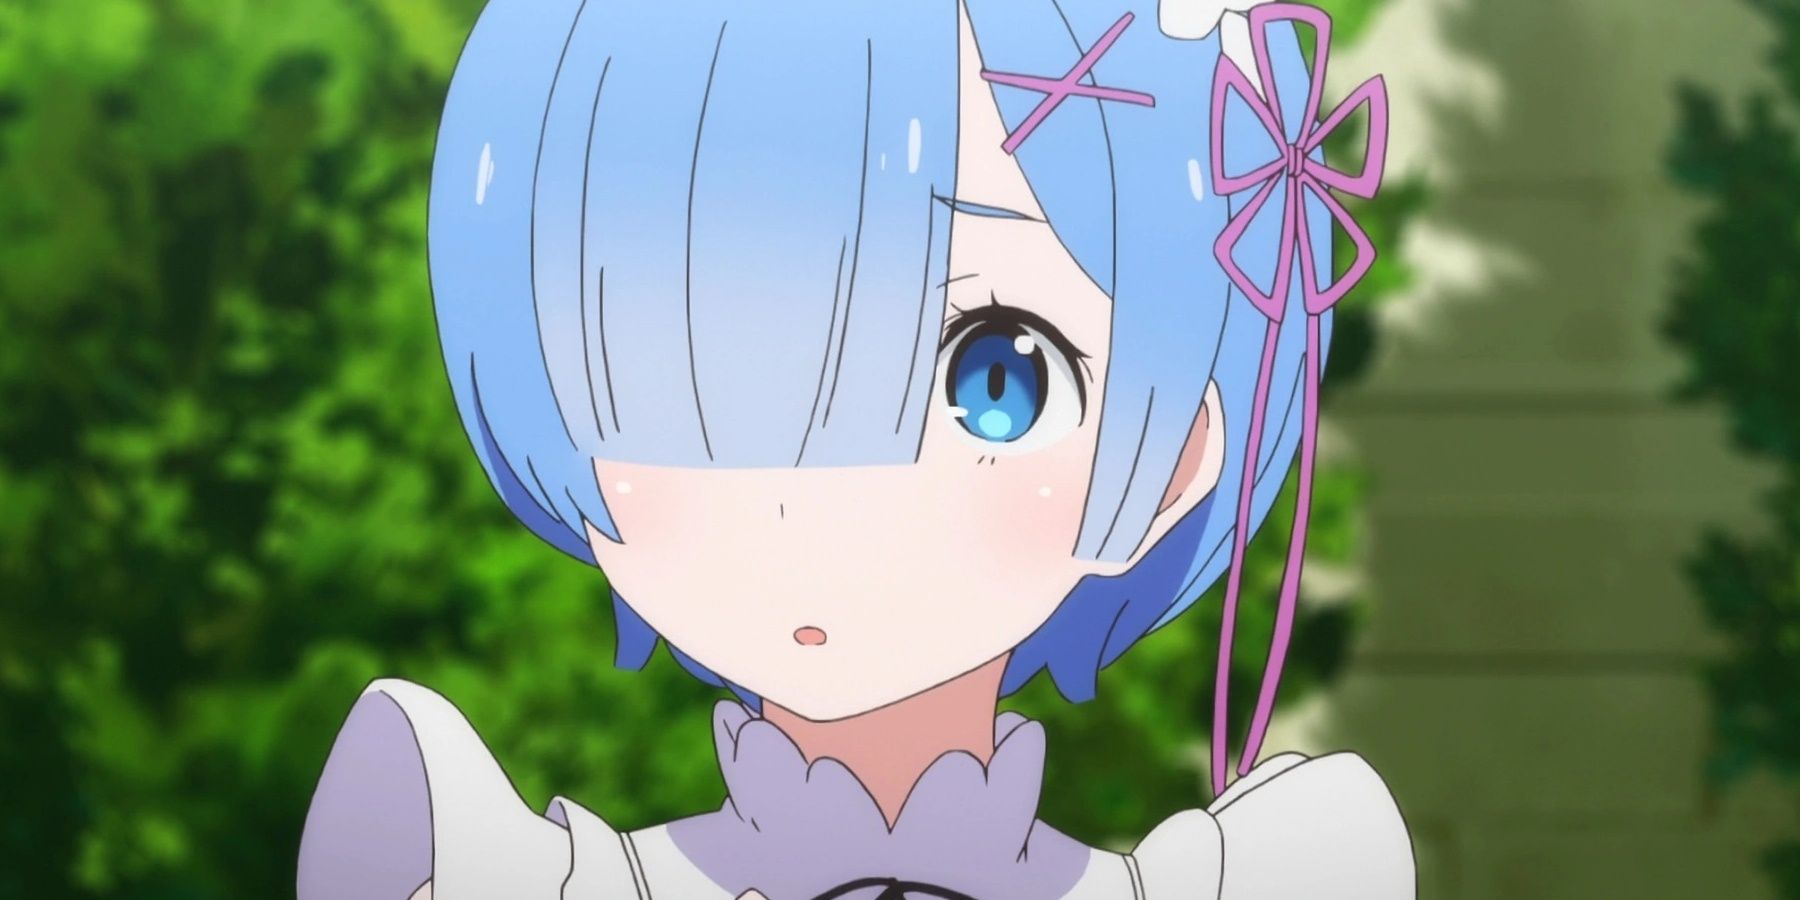 Rem from re:zero looking surprised.